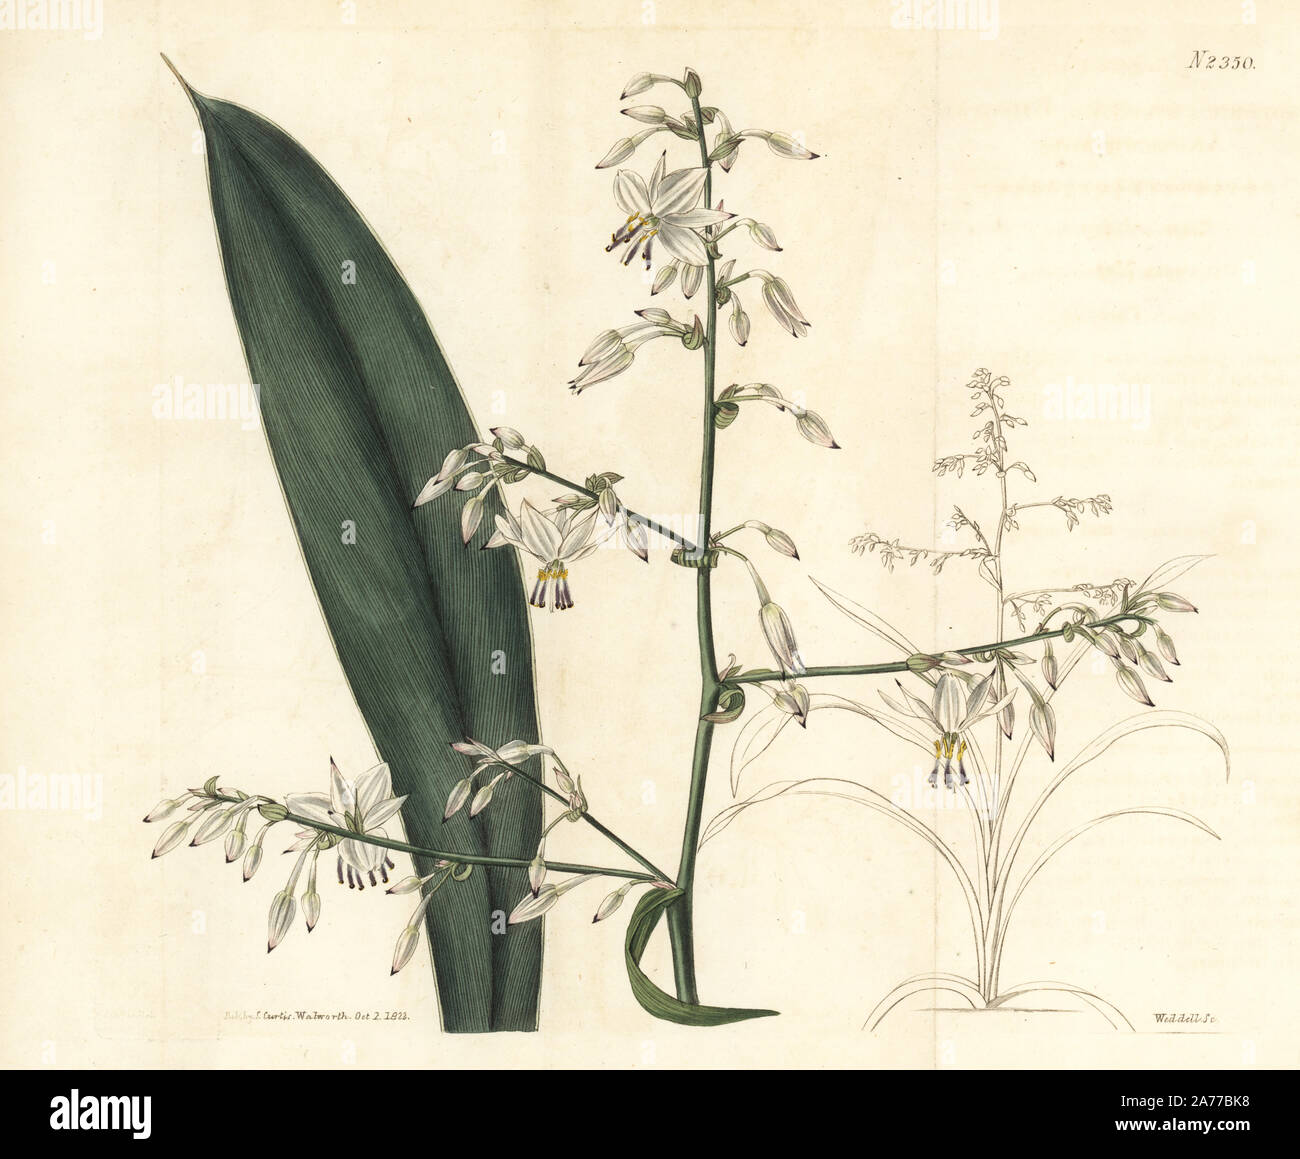 New Zealand rock lily or broad-leaved arthropodium, Arthropodium cirrhatum. Handcoloured copperplate engraving by Weddell after an illustration by John Curtis from Samuel Curtis's 'Botanical Magazine,' London, 1822. Stock Photo